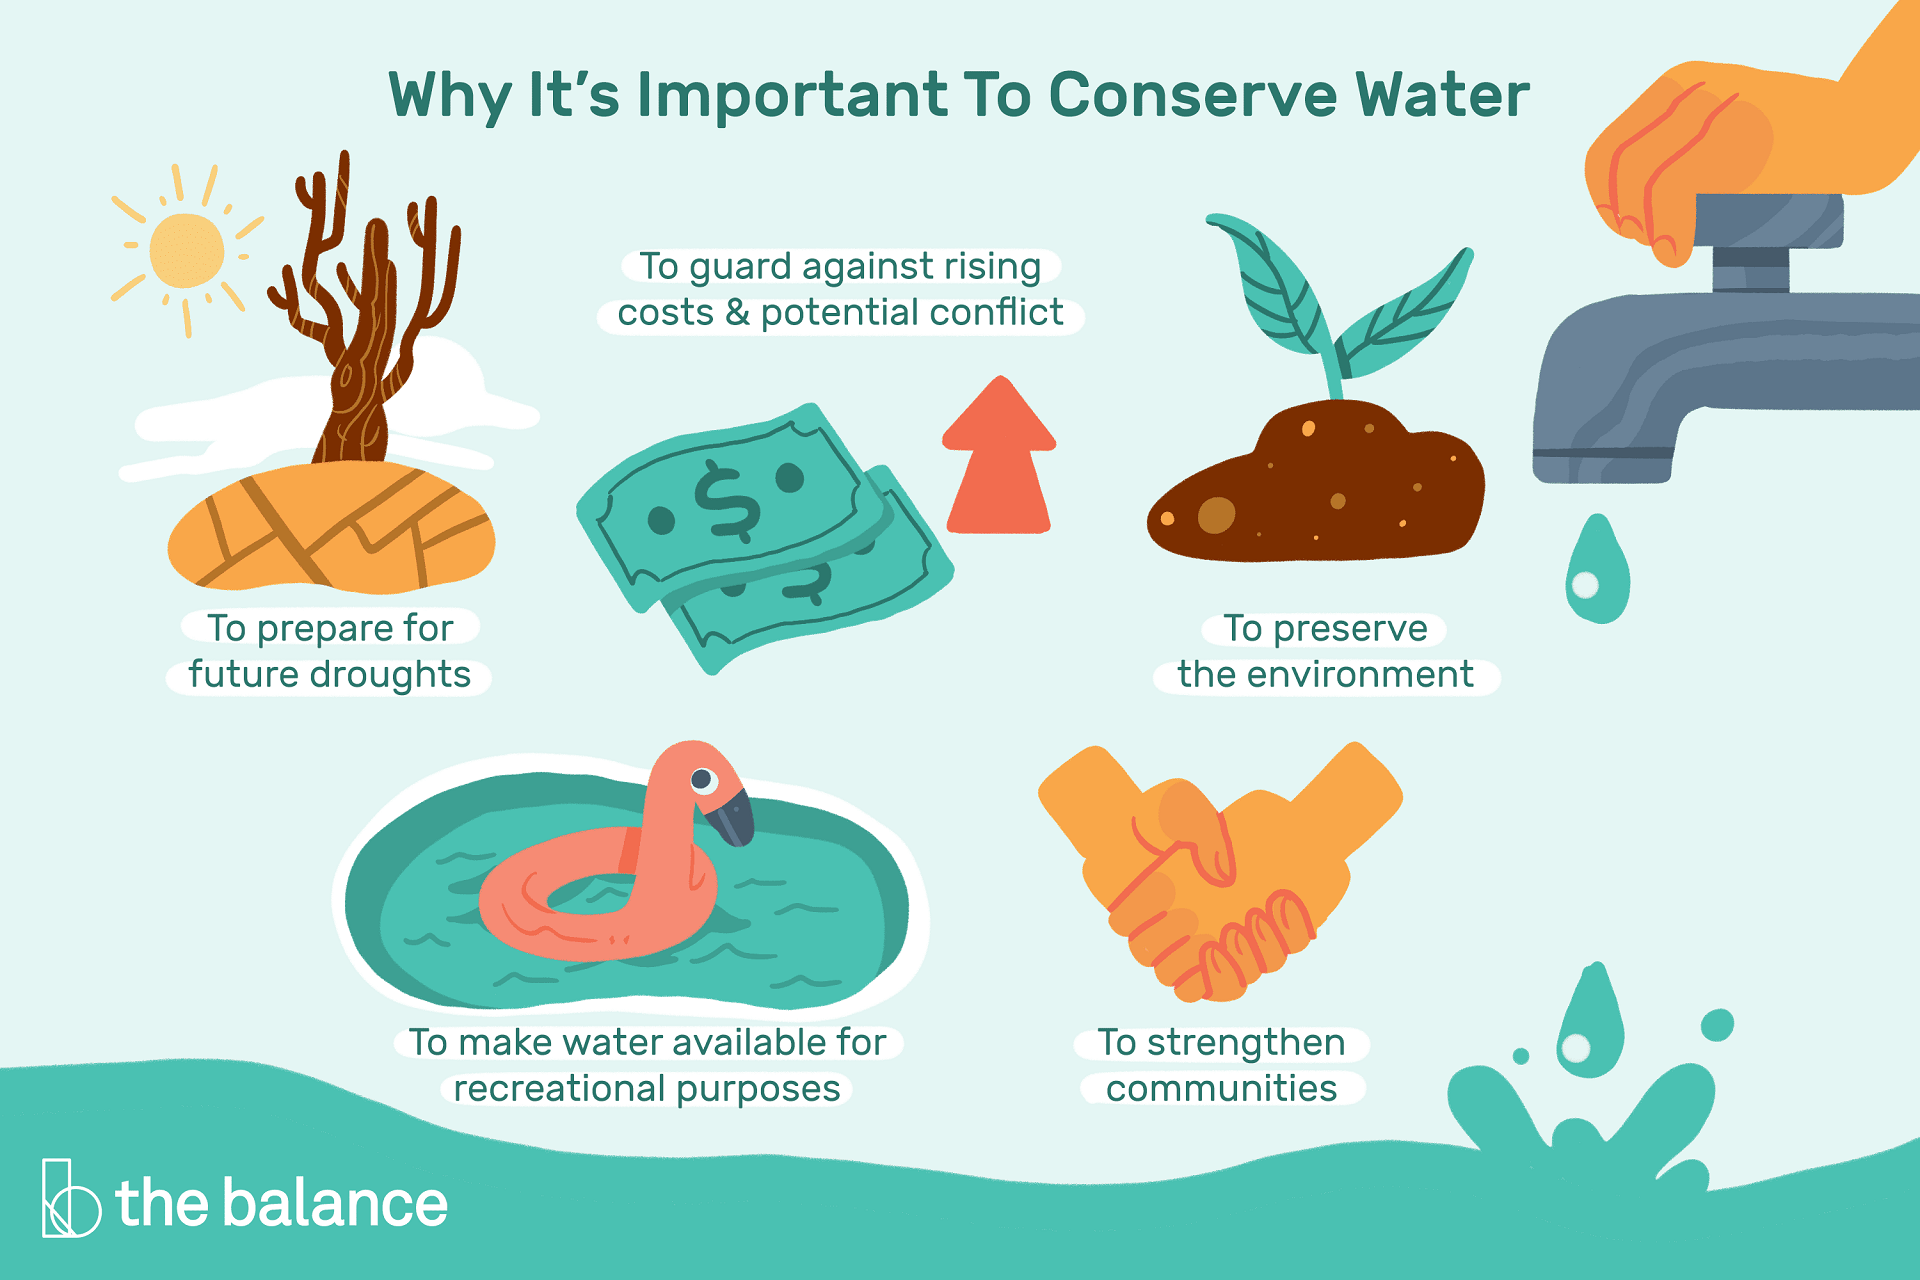 Conservation Efforts Why Should We Save Water 3157877 Final 6A441D06D93A4706A83161973Ed4Dbb2 1